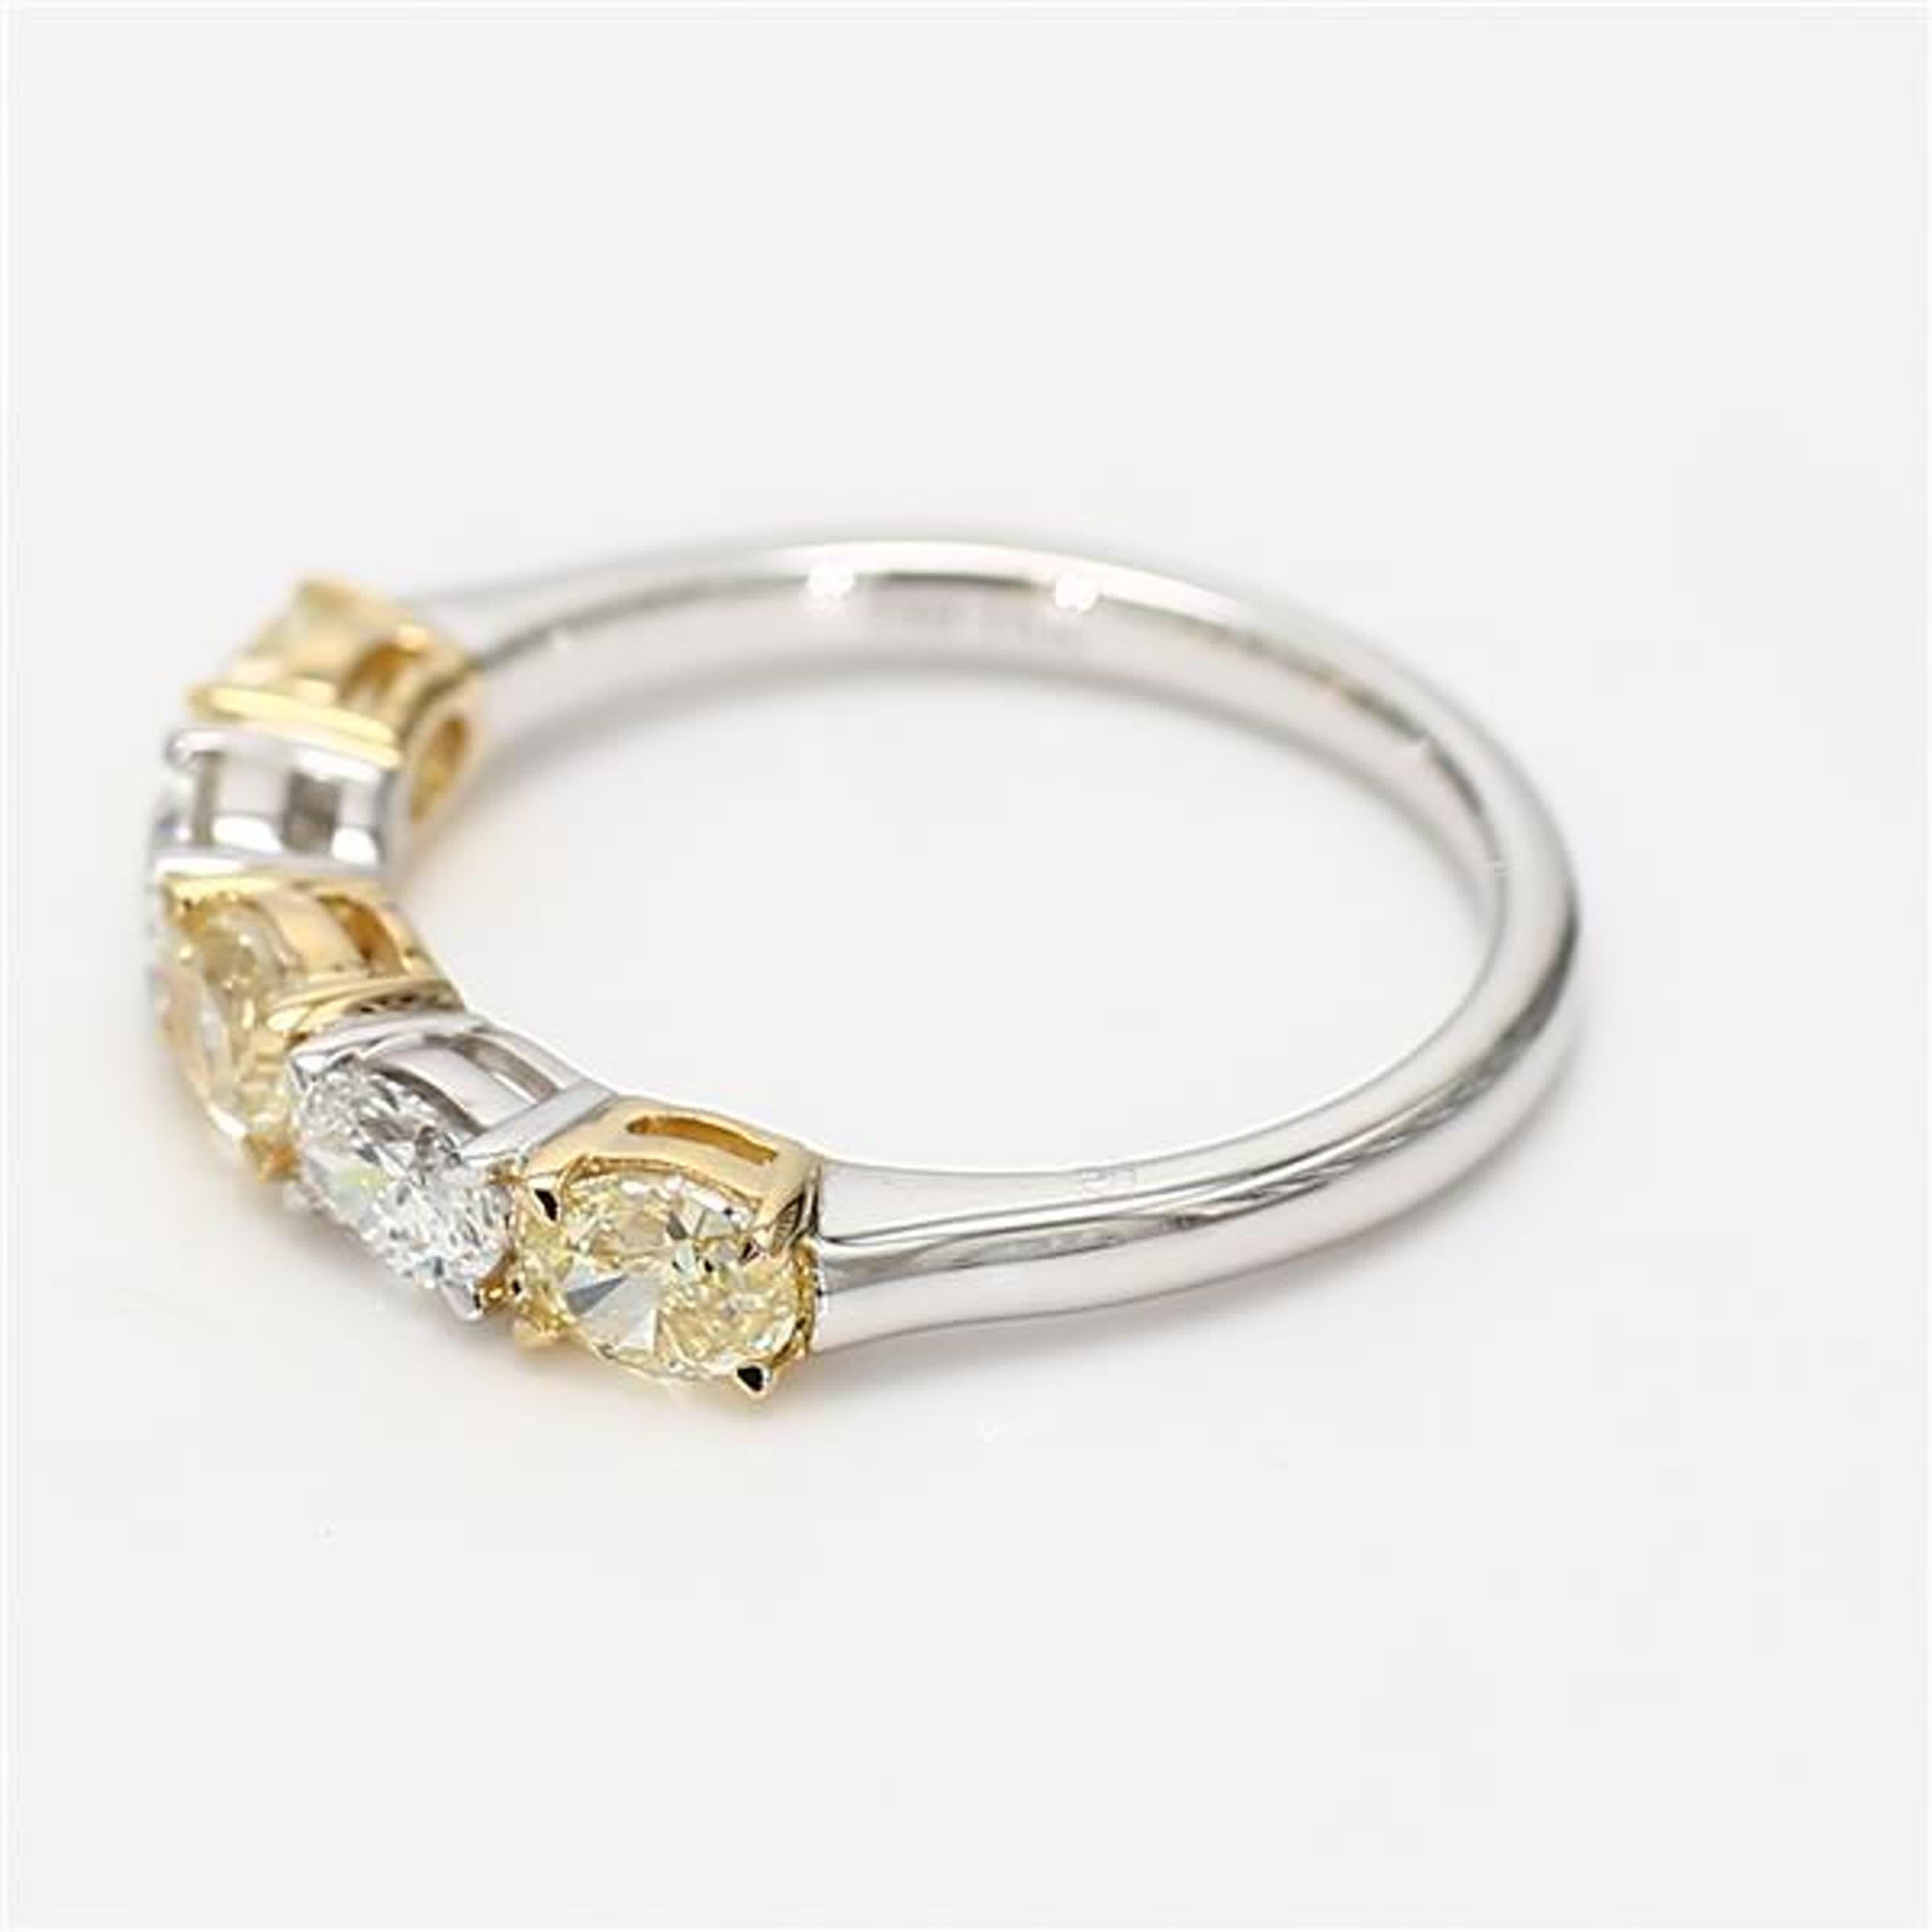 Contemporary Natural Yellow Oval and White Diamond 1.17 Carat TW Gold Wedding Band For Sale